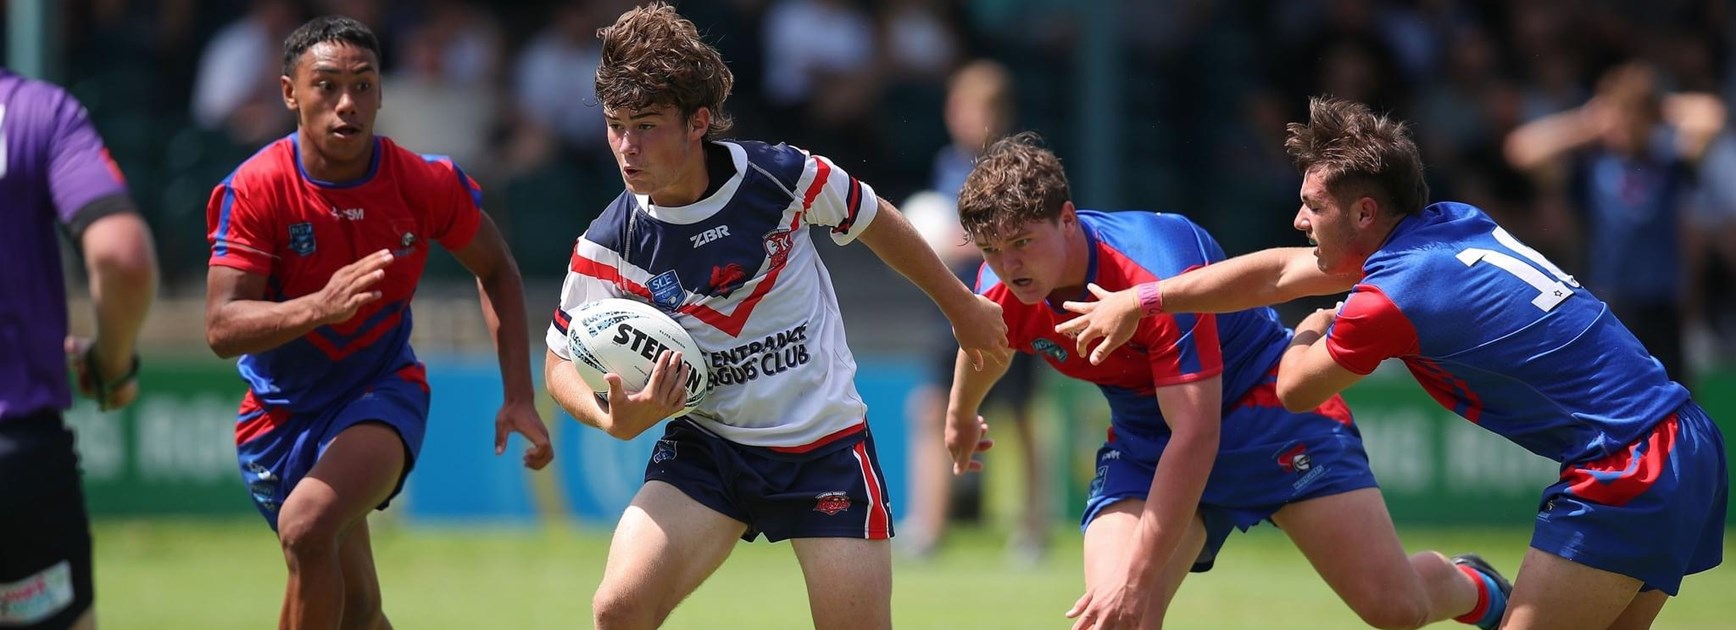 Juniors Report: Central Coast Through to Andrew Johns Cup Semi-Finals